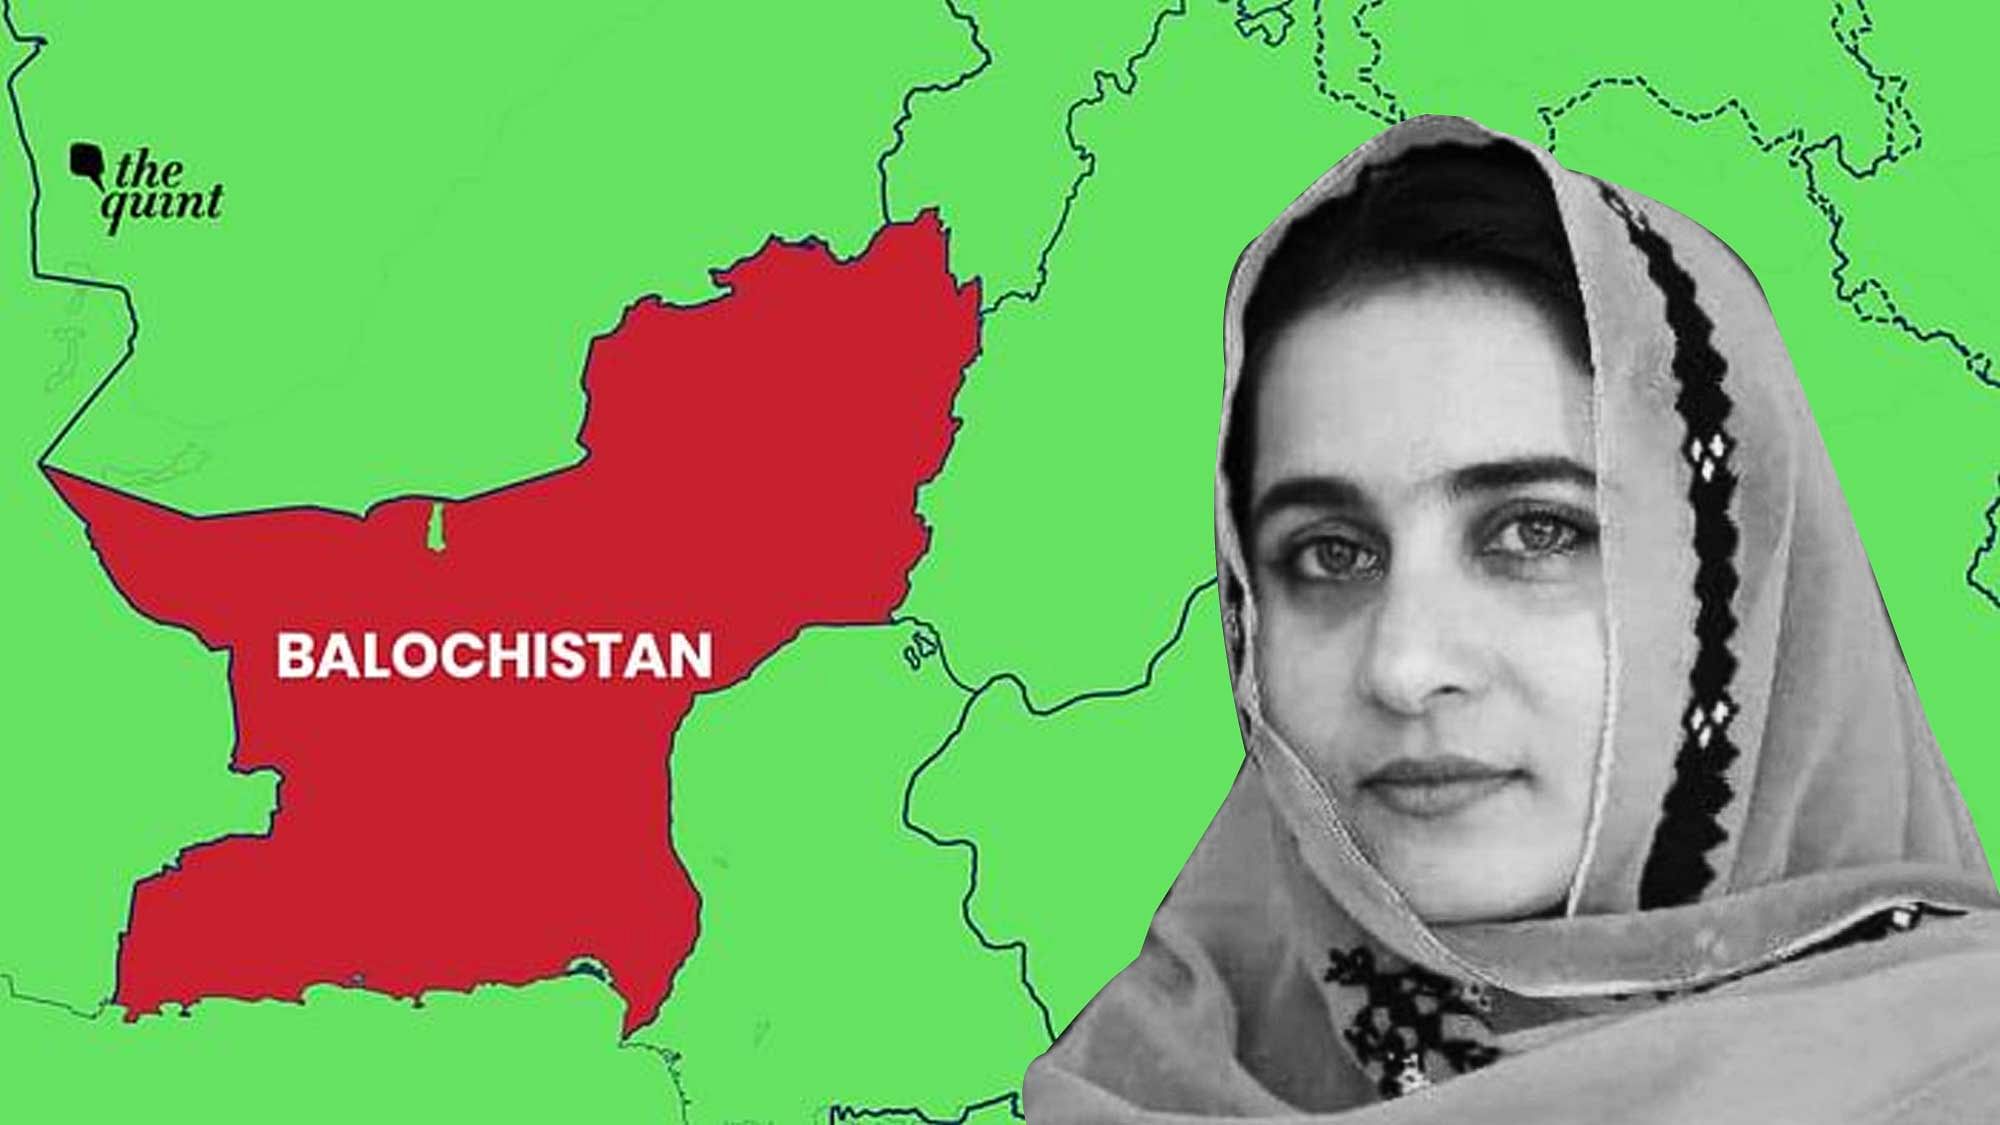 Balochistan map and Karima Baloch — images used for representational purposes.